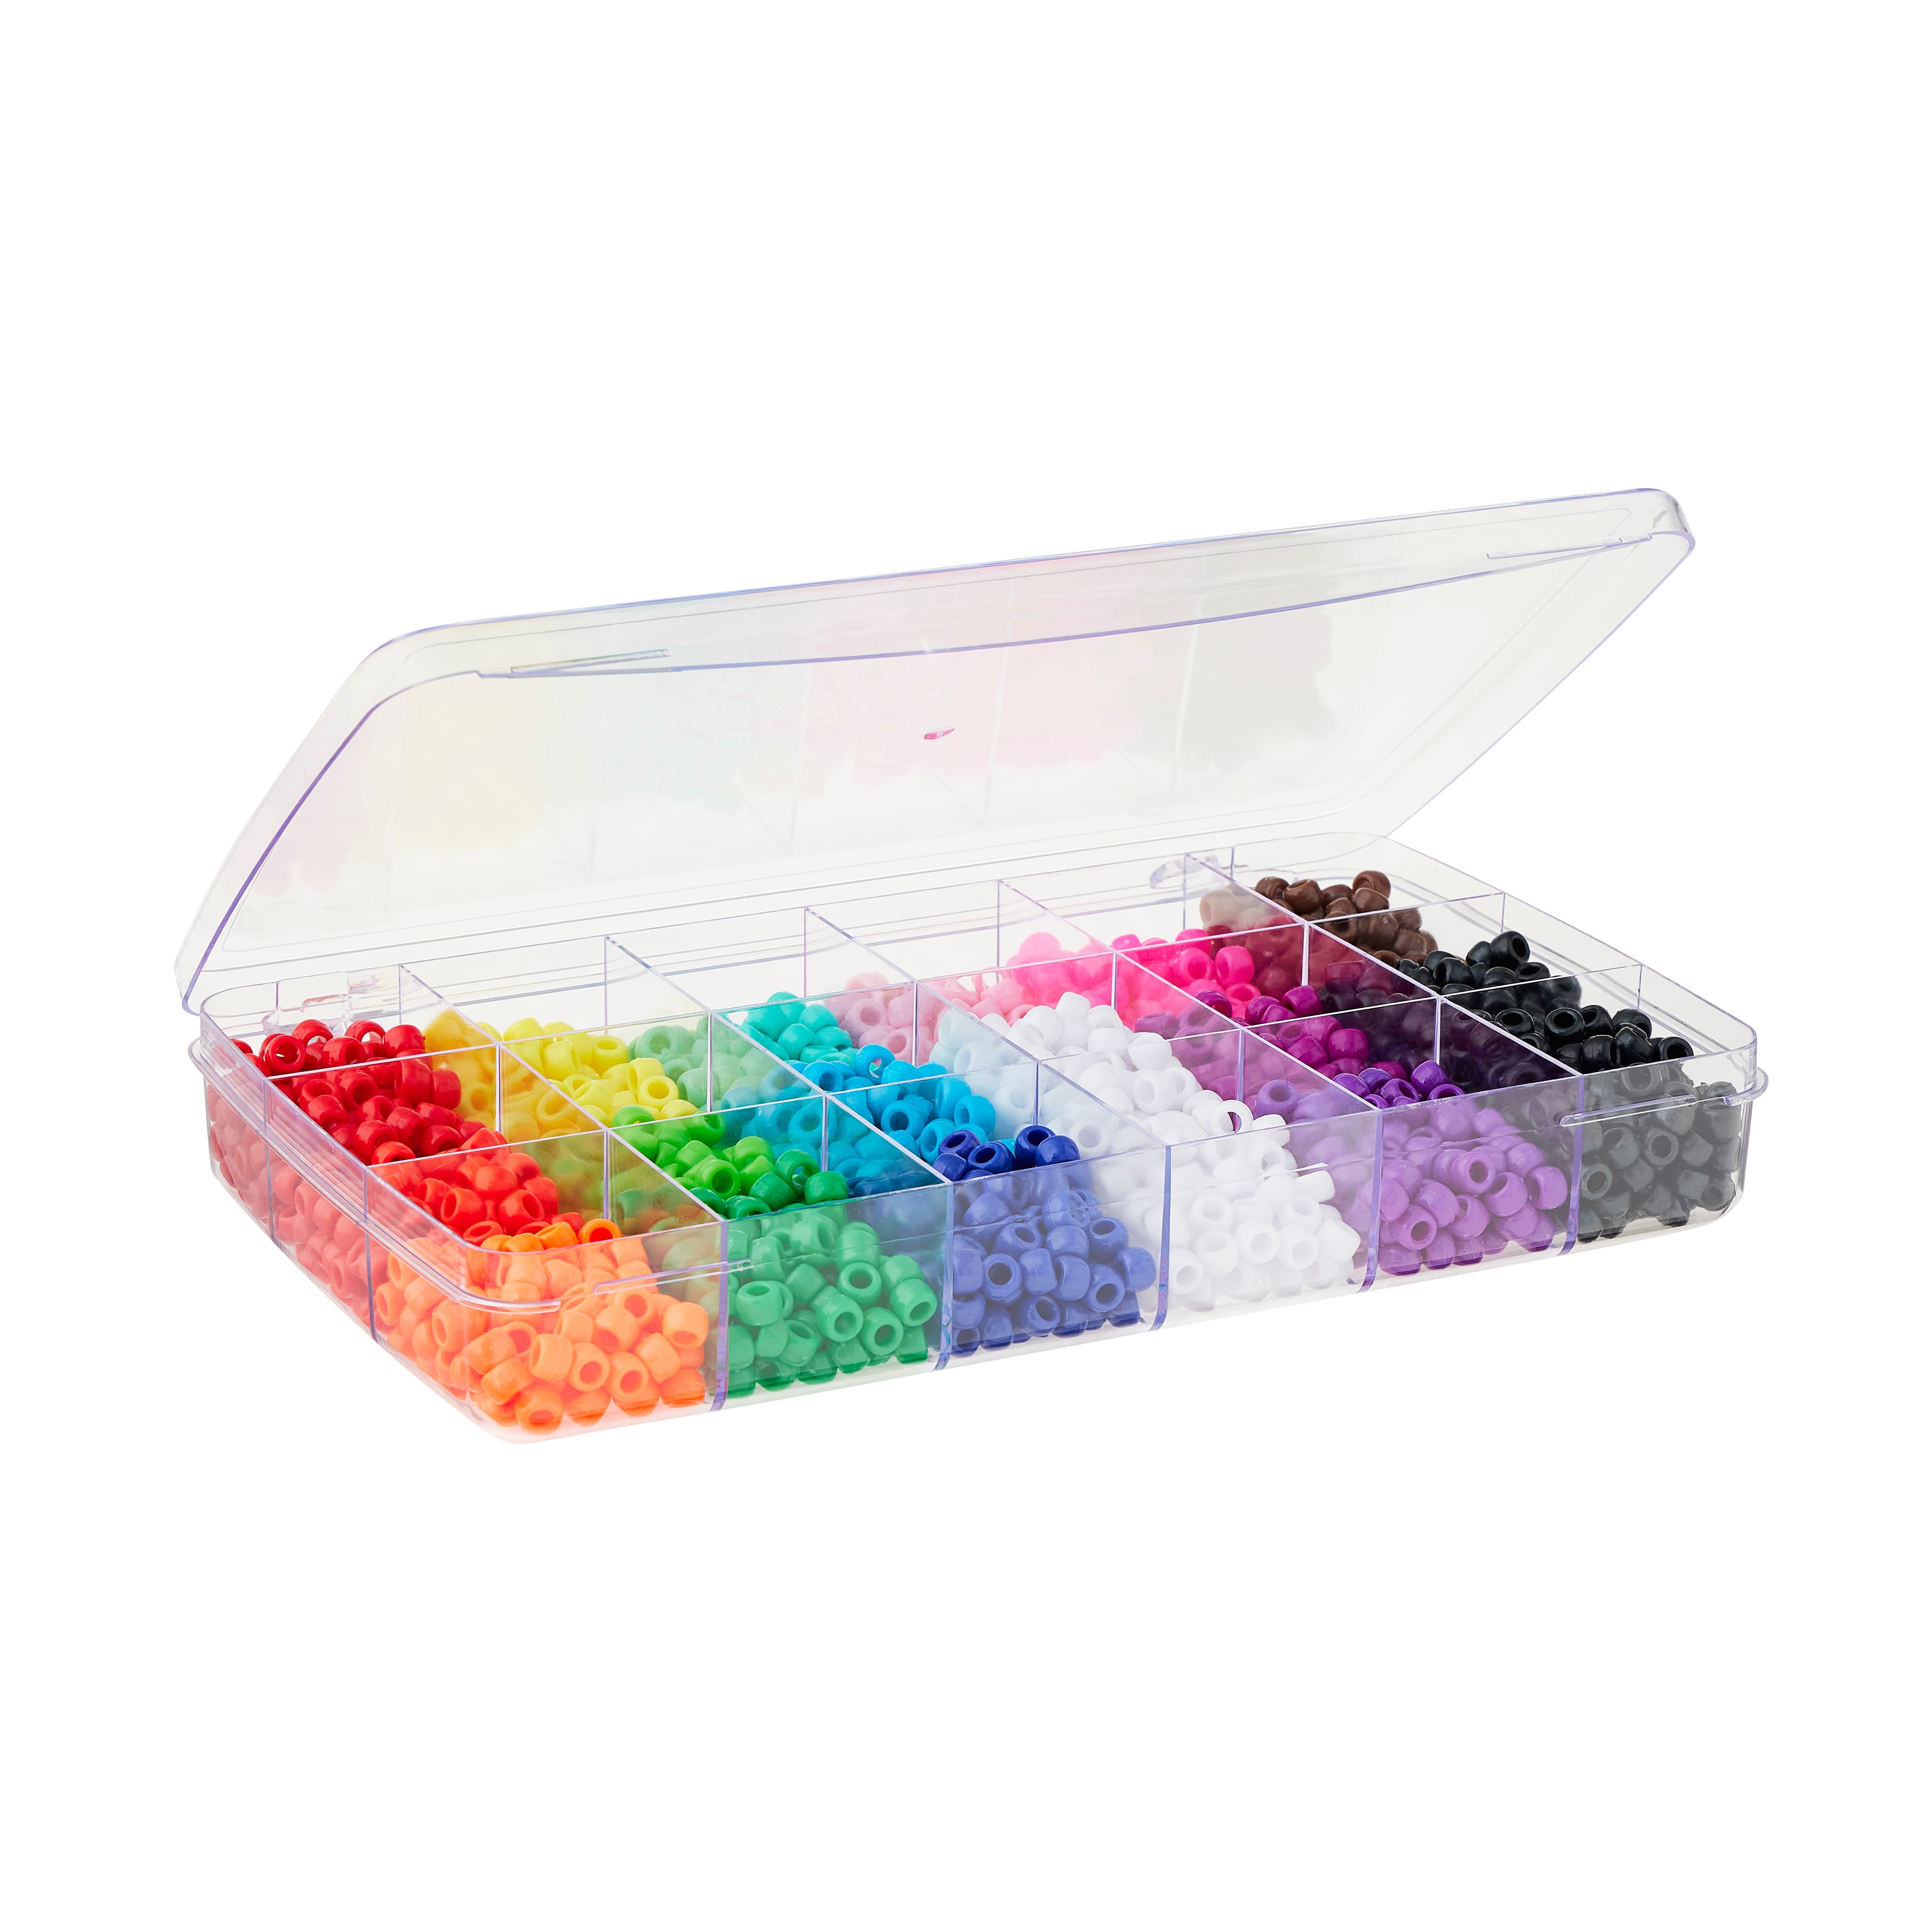 Shop for the Large Rainbow Pony Bead Box By Creatology™ at Michaels